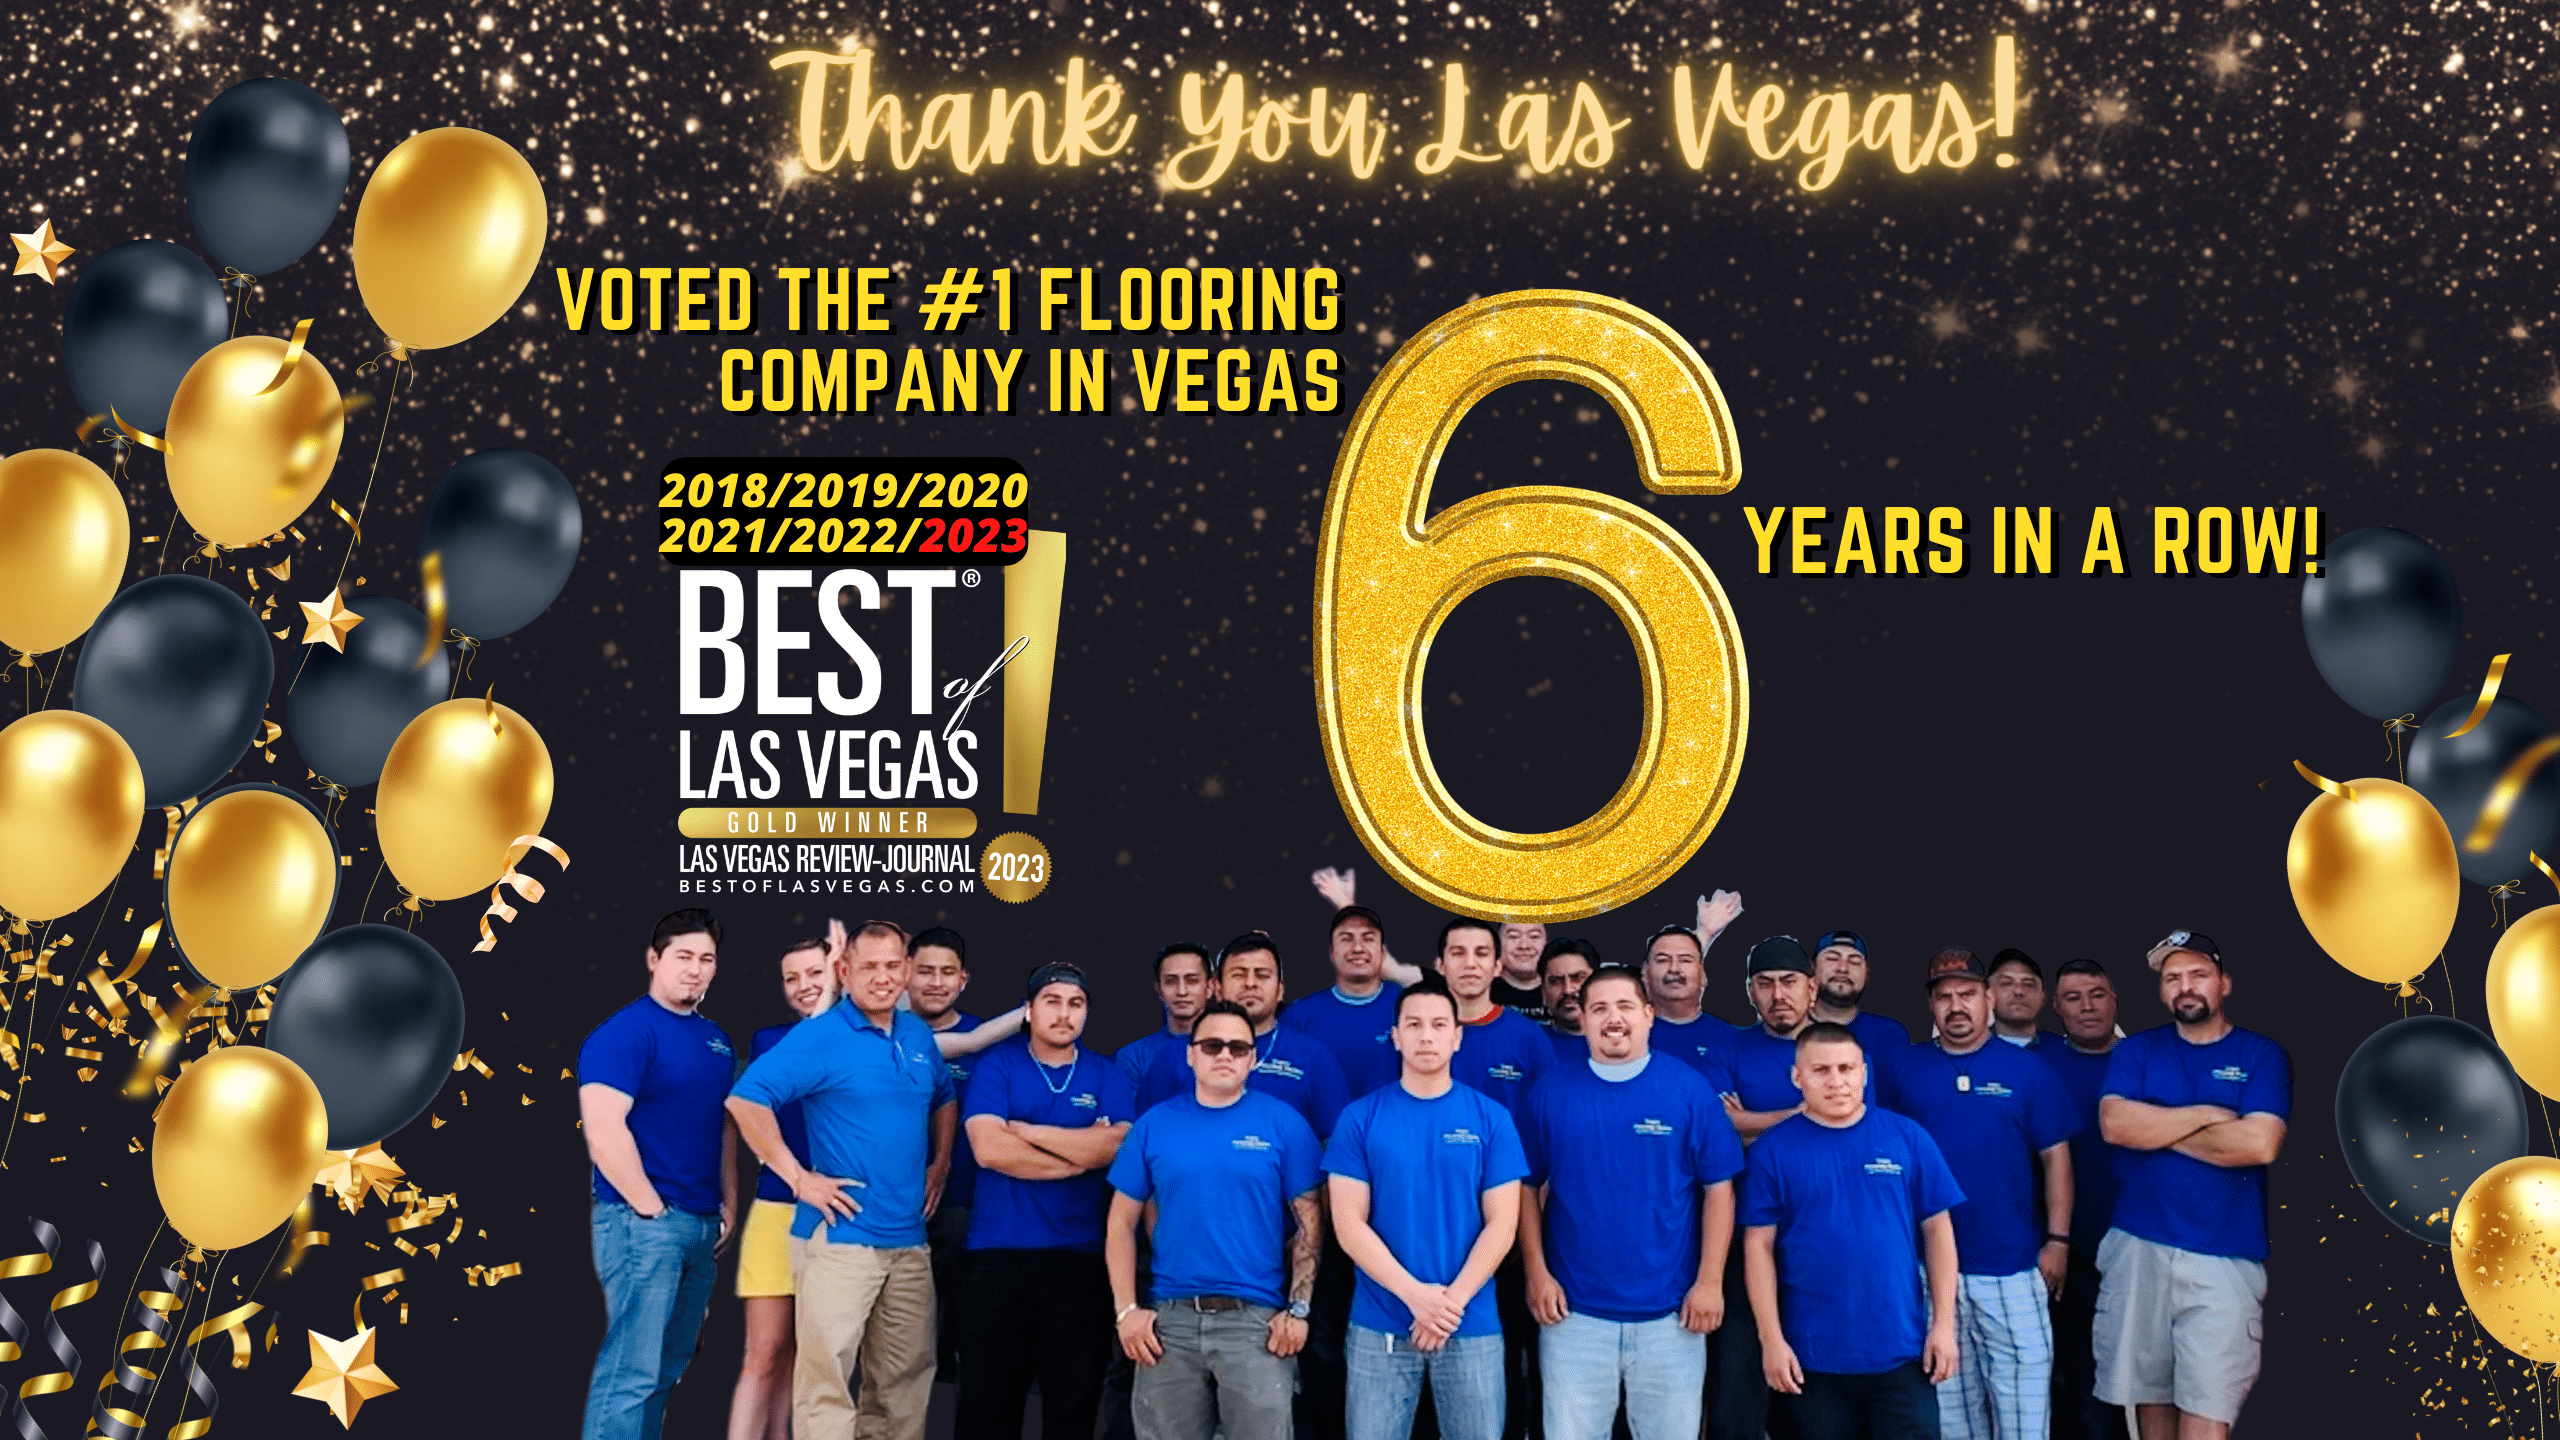 Group Picture Of Vegas Flooring Outlet Employees That Can Install Vinyl